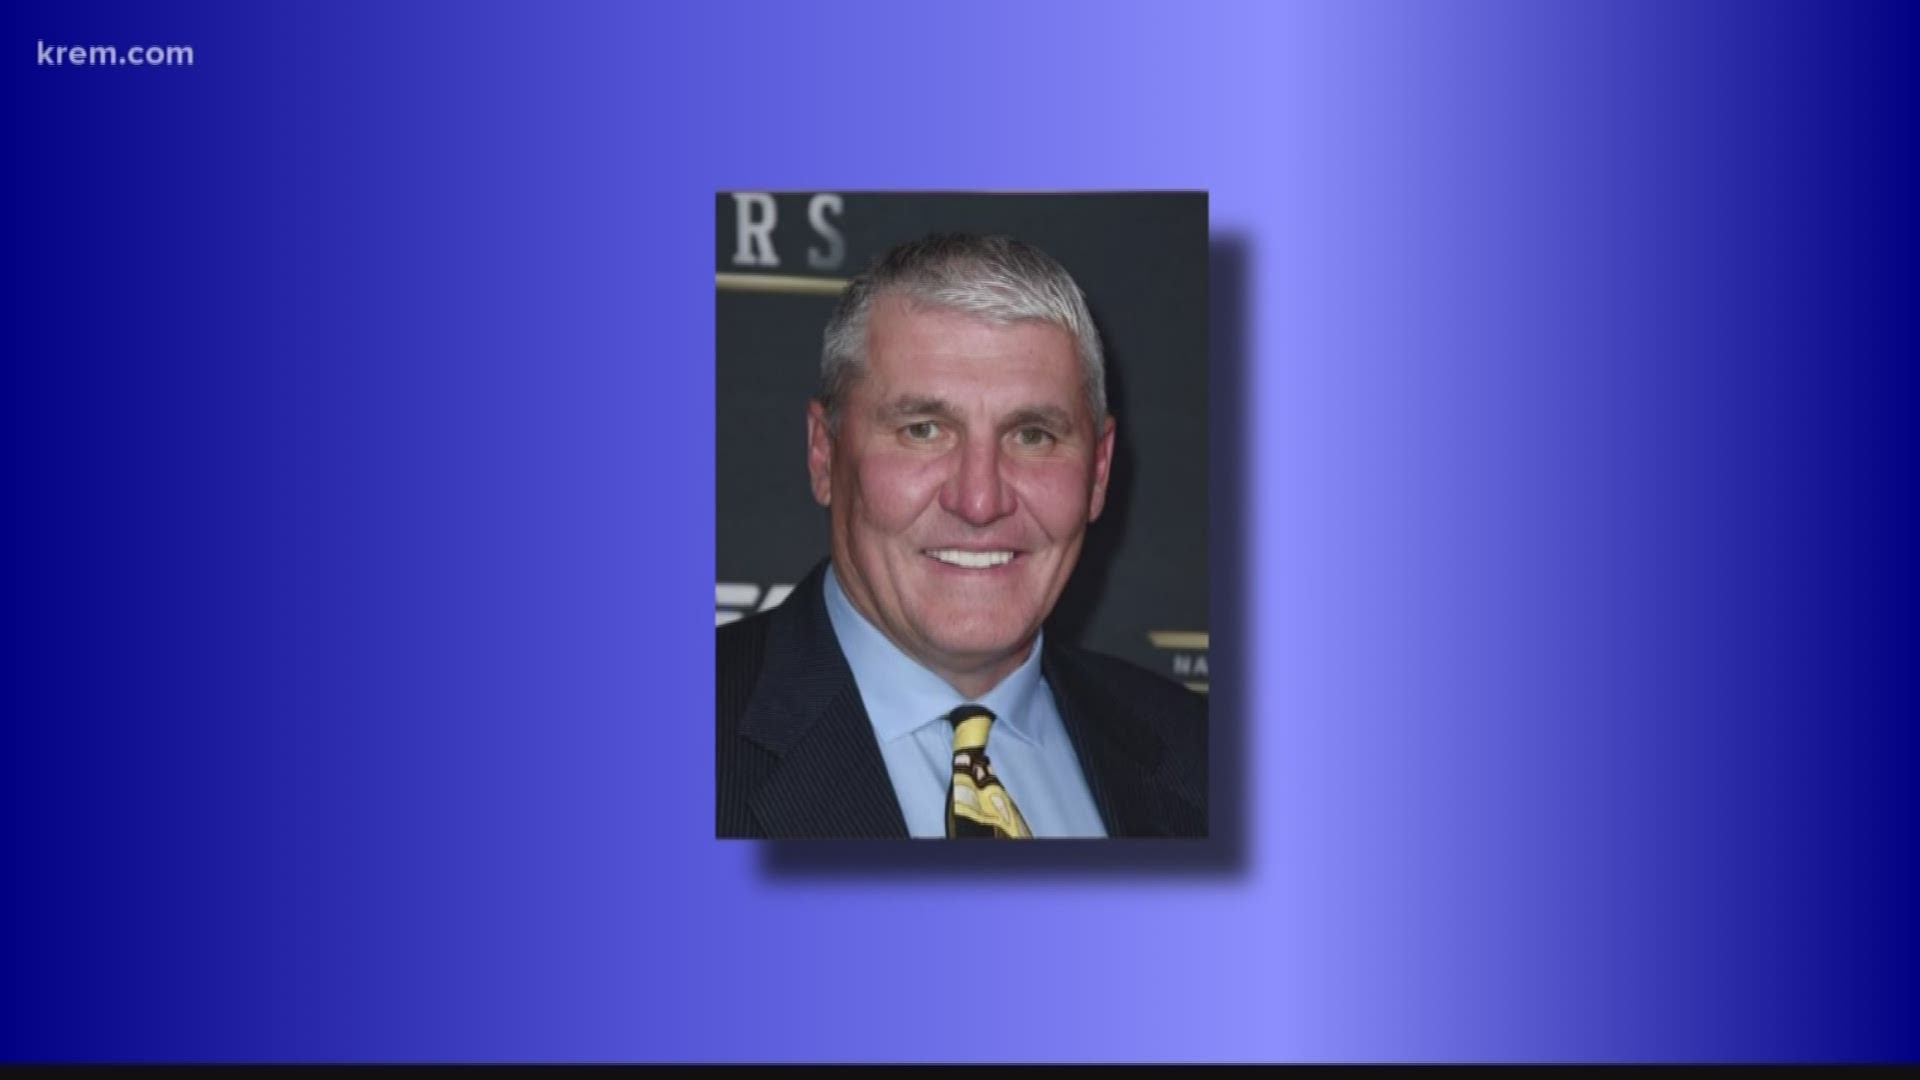 A judge dismissed assault charges against former NFL player and WSU quarterback Mark Rypien. Spokane Police arrested him in June after a domestic violence call in north Spokane.